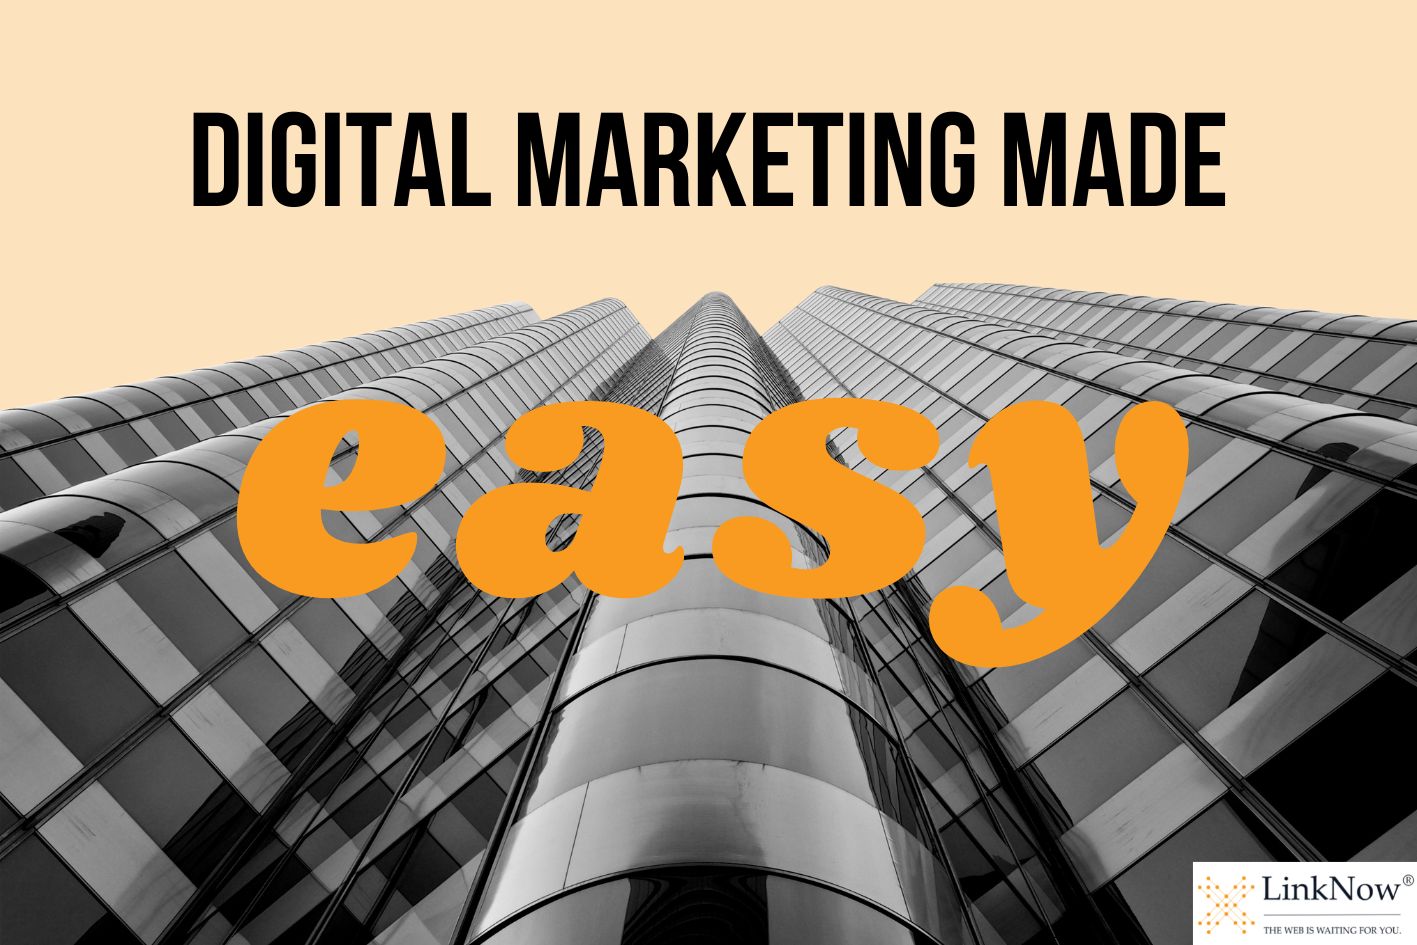 A grey skyscraper rises in the background. In the foreground, caption says: Digital marketing made easy.